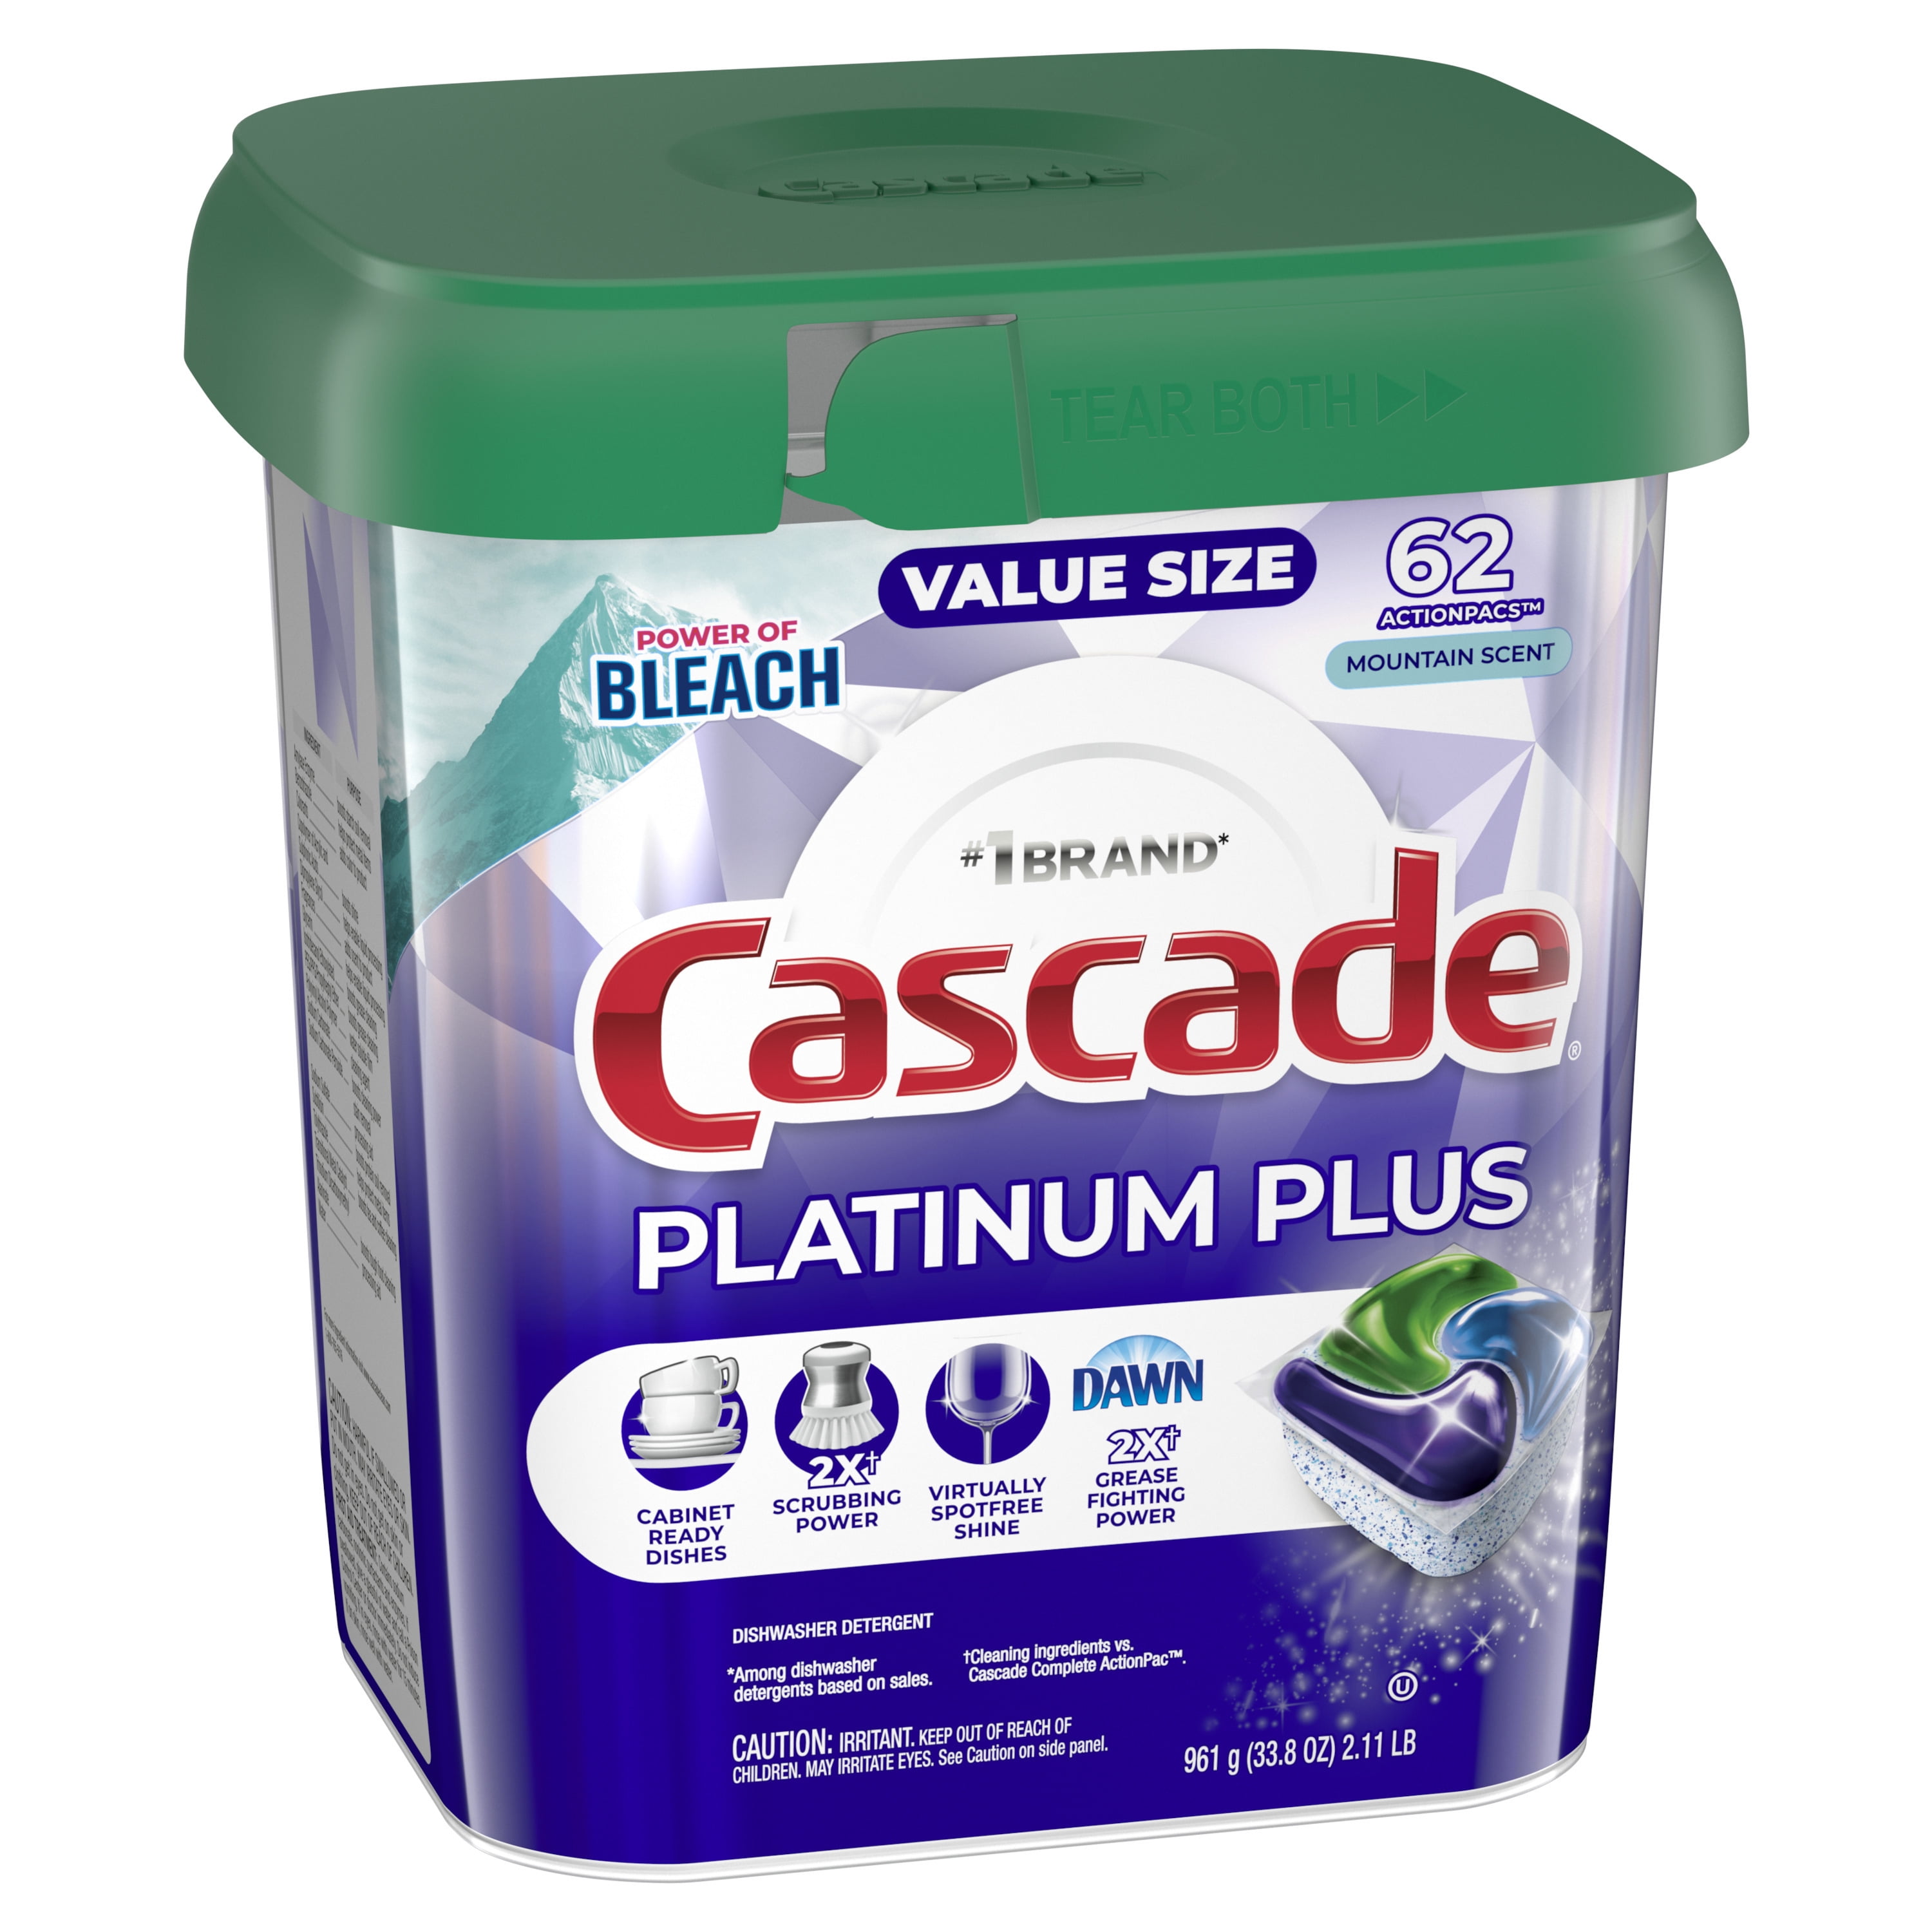 One Planet: How the production of Cascade dishwasher detergent contributes  to elevated cancer risks in multiple communities across the South